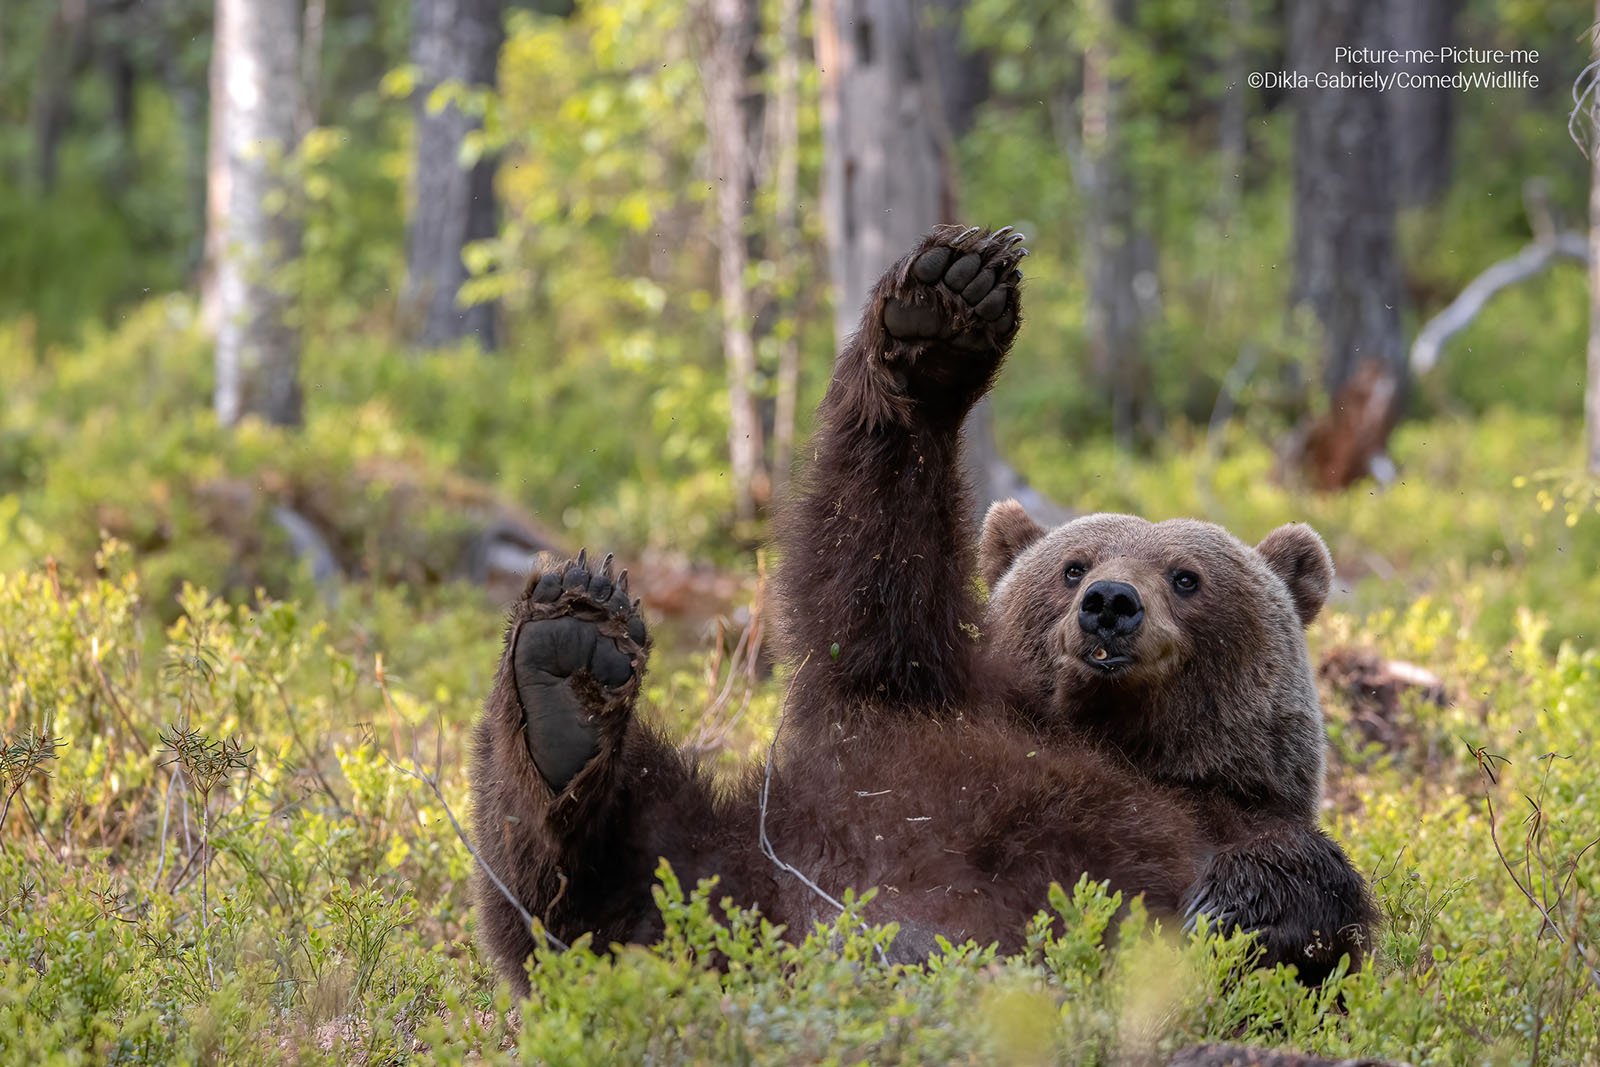 A brown bear in Finland poses with its leg straight up in the air.